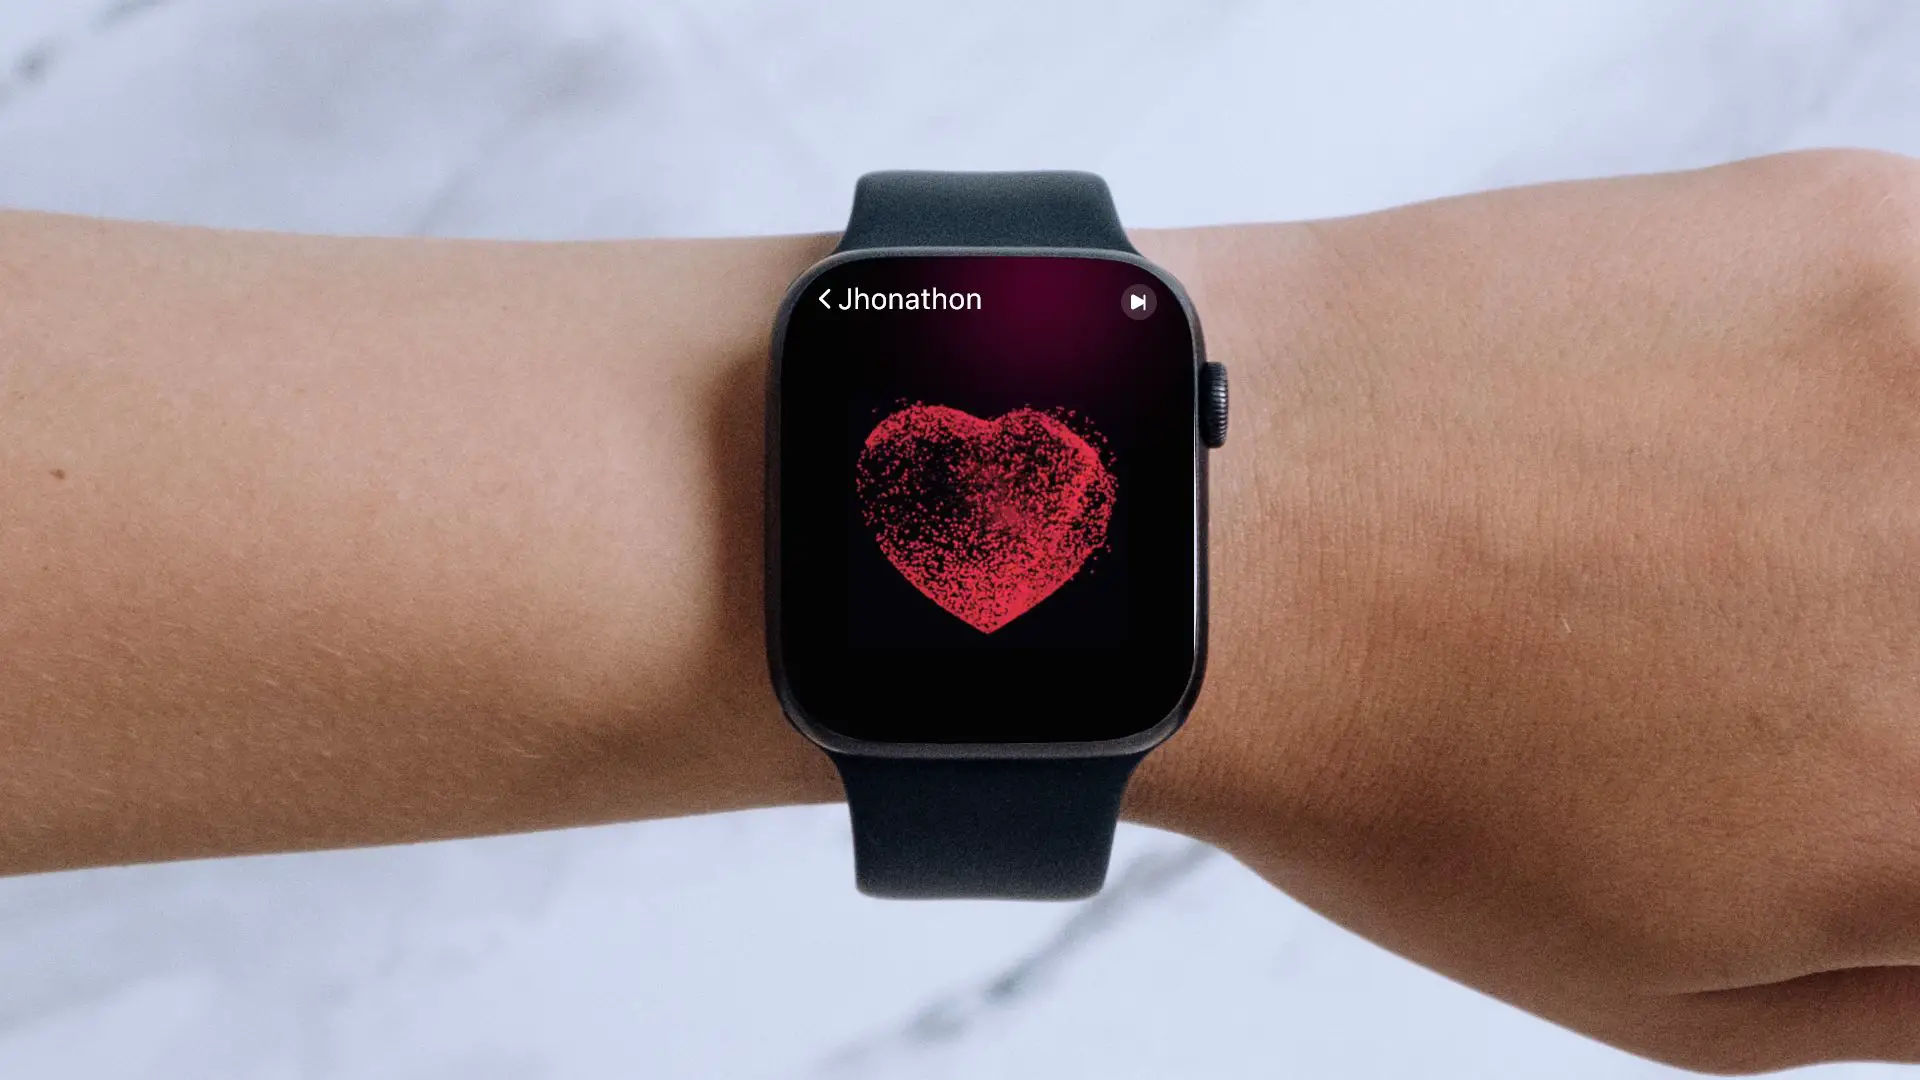 How to send heartbeat on Apple Watch